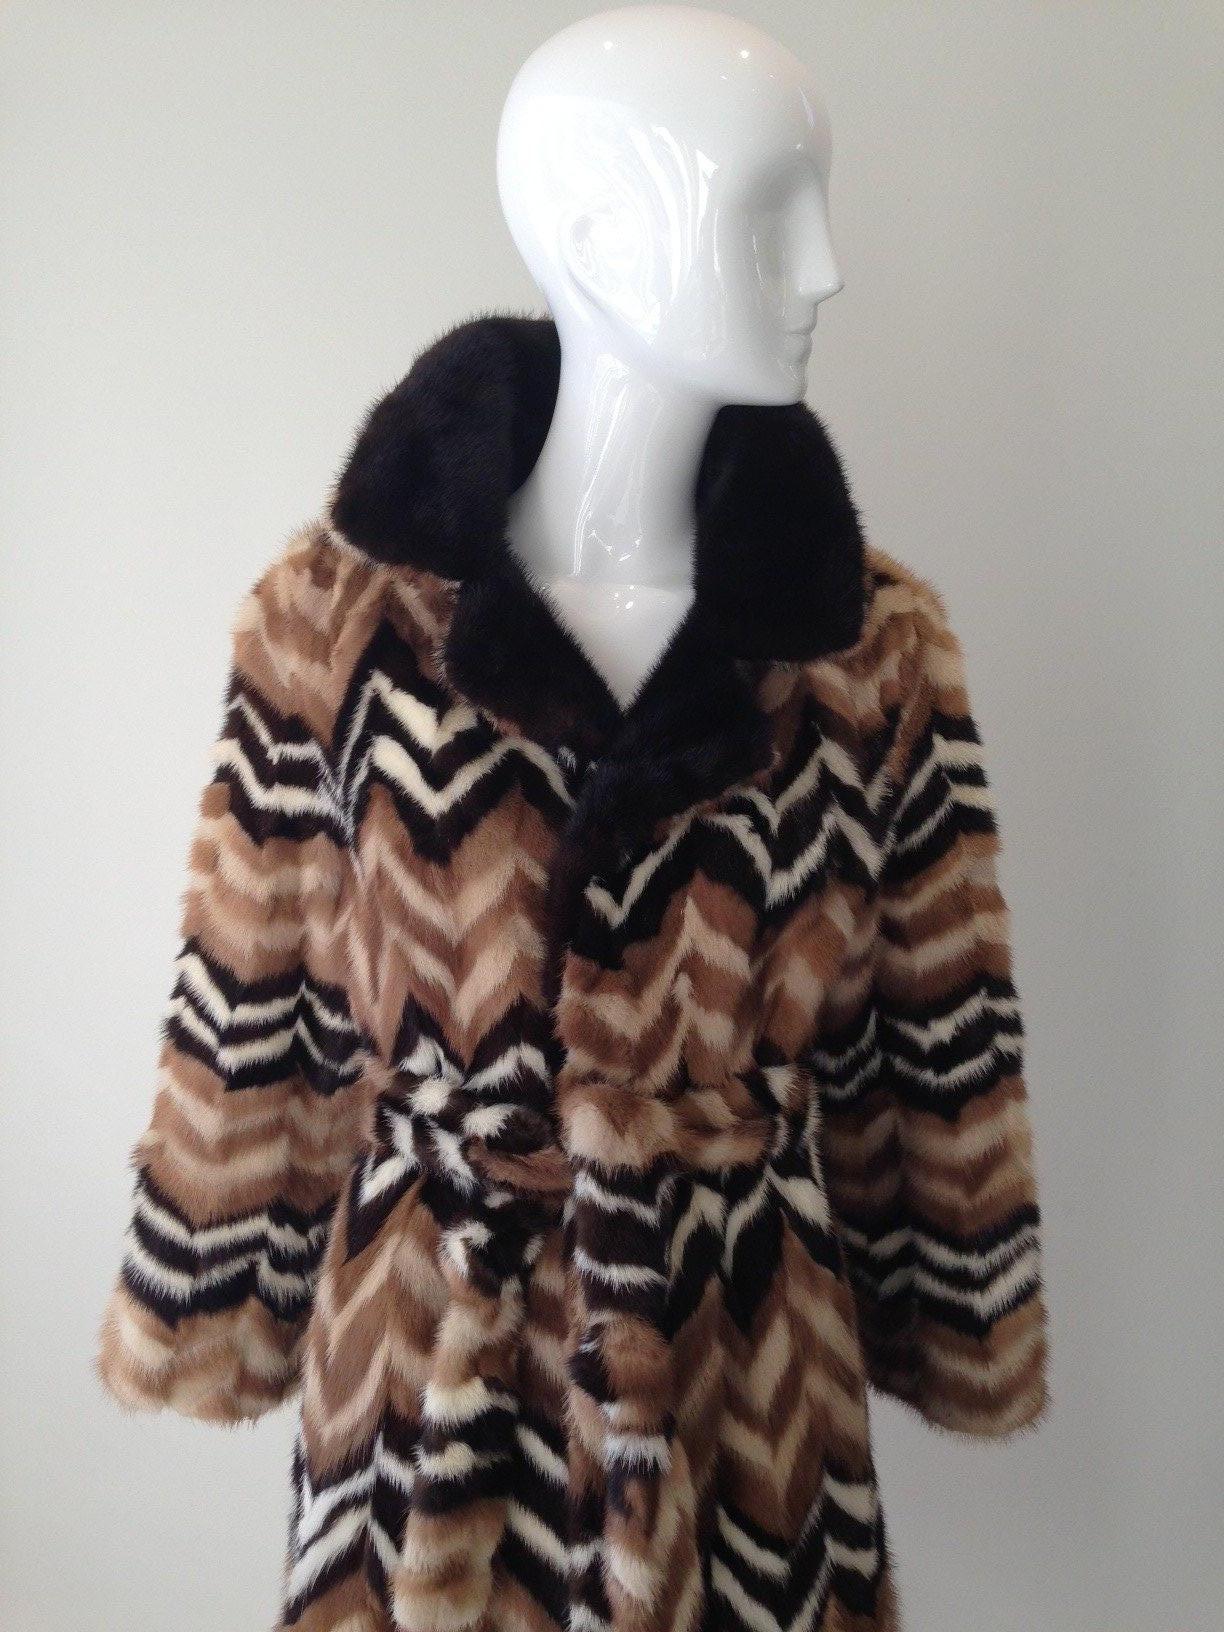 1970s Mink coat in chevron print.
There are stains inside the lining (see image)
Fit size 4 to 8 US size
Shoulder width : 17